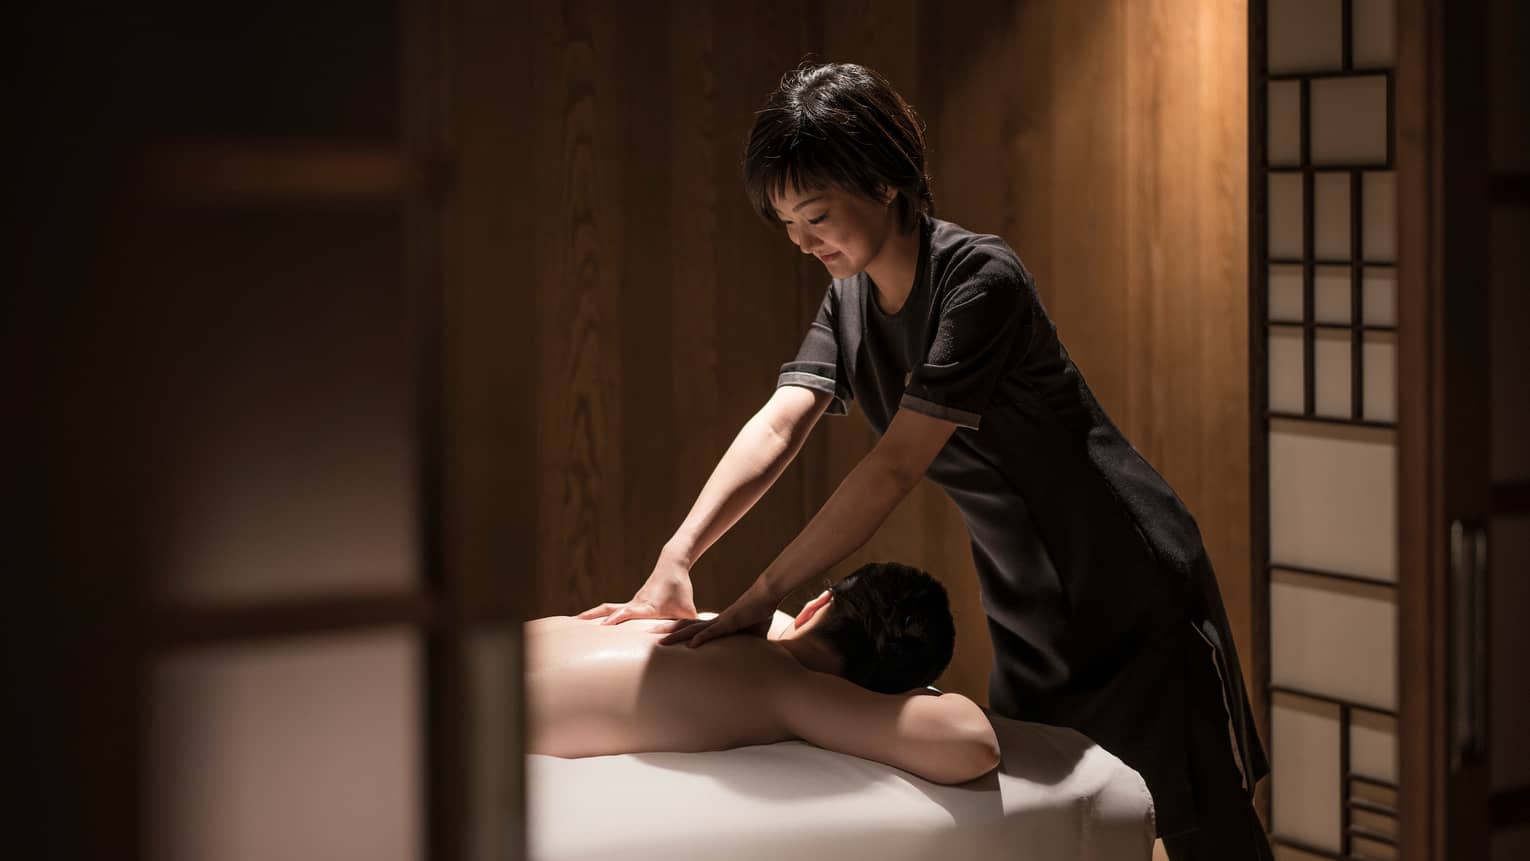 Man lies face-down on massage table as masseuse in black uniform rubs his shoulders